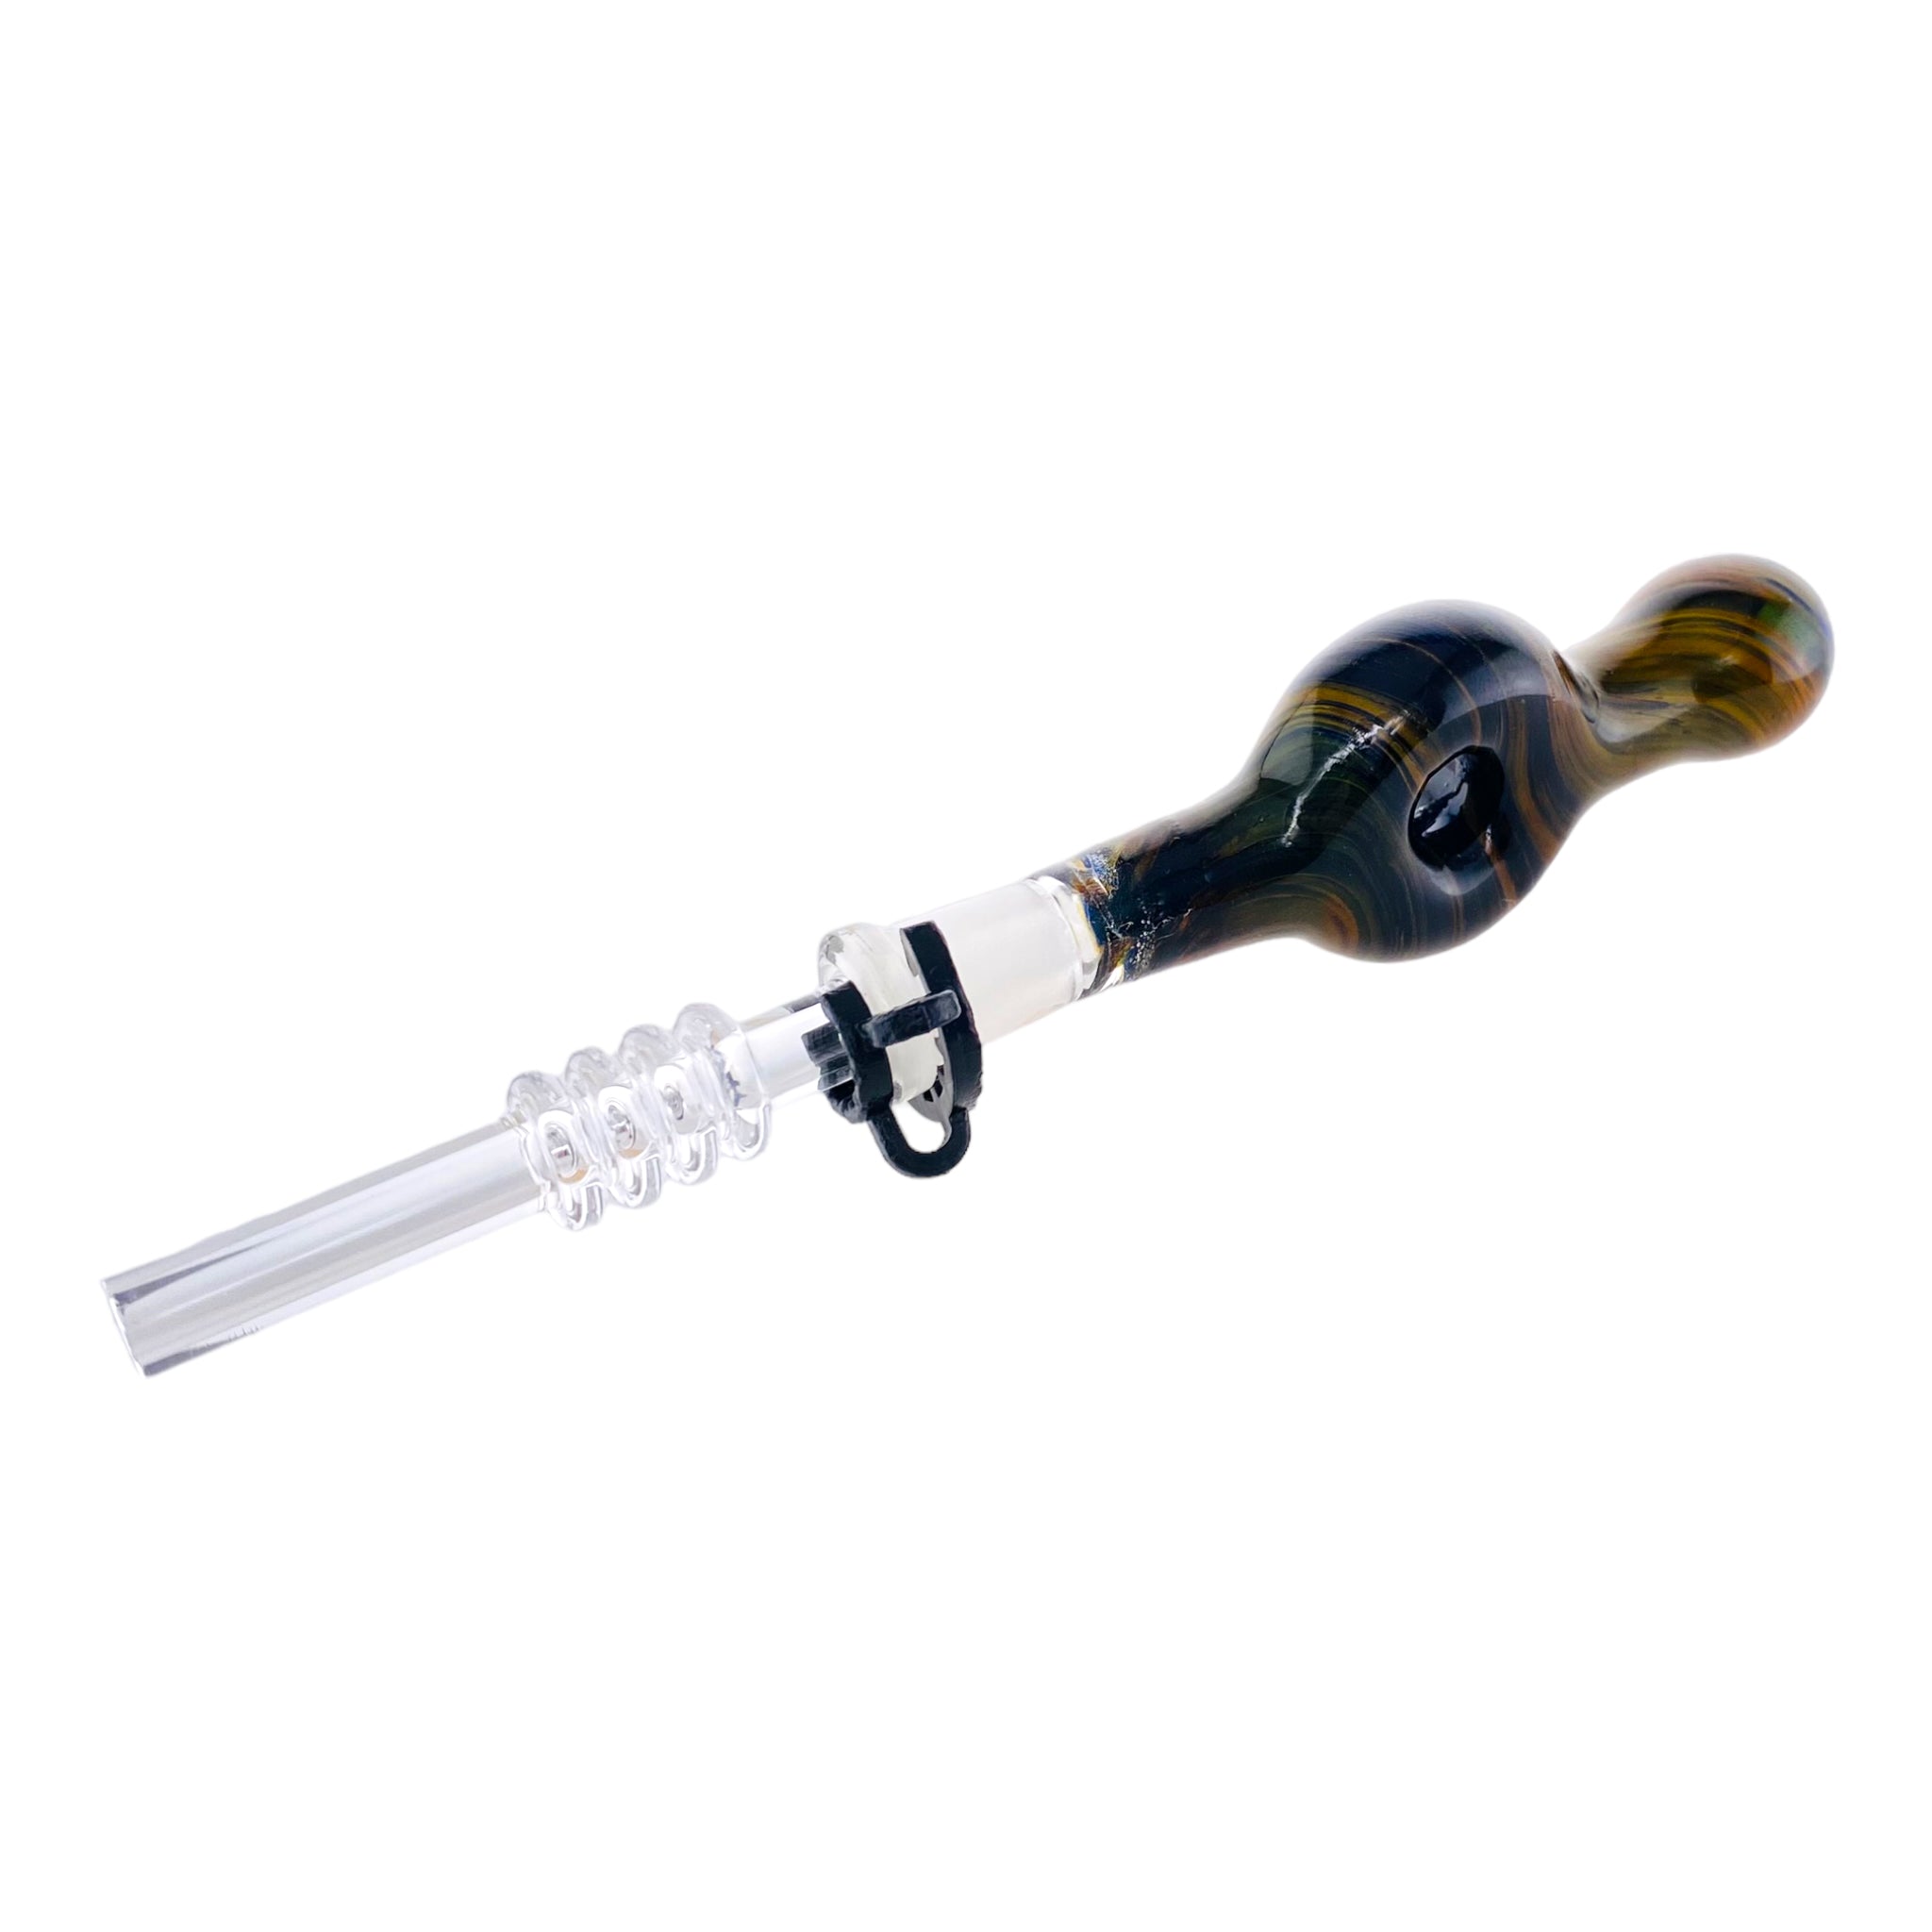 Nectar Collector Quartz Tip Nail 10mm 14mm 18mm Smoking Accessories  Threaded Glass Dab Straw Stick For Mini Small Nector Kit From Yareone,  $0.92